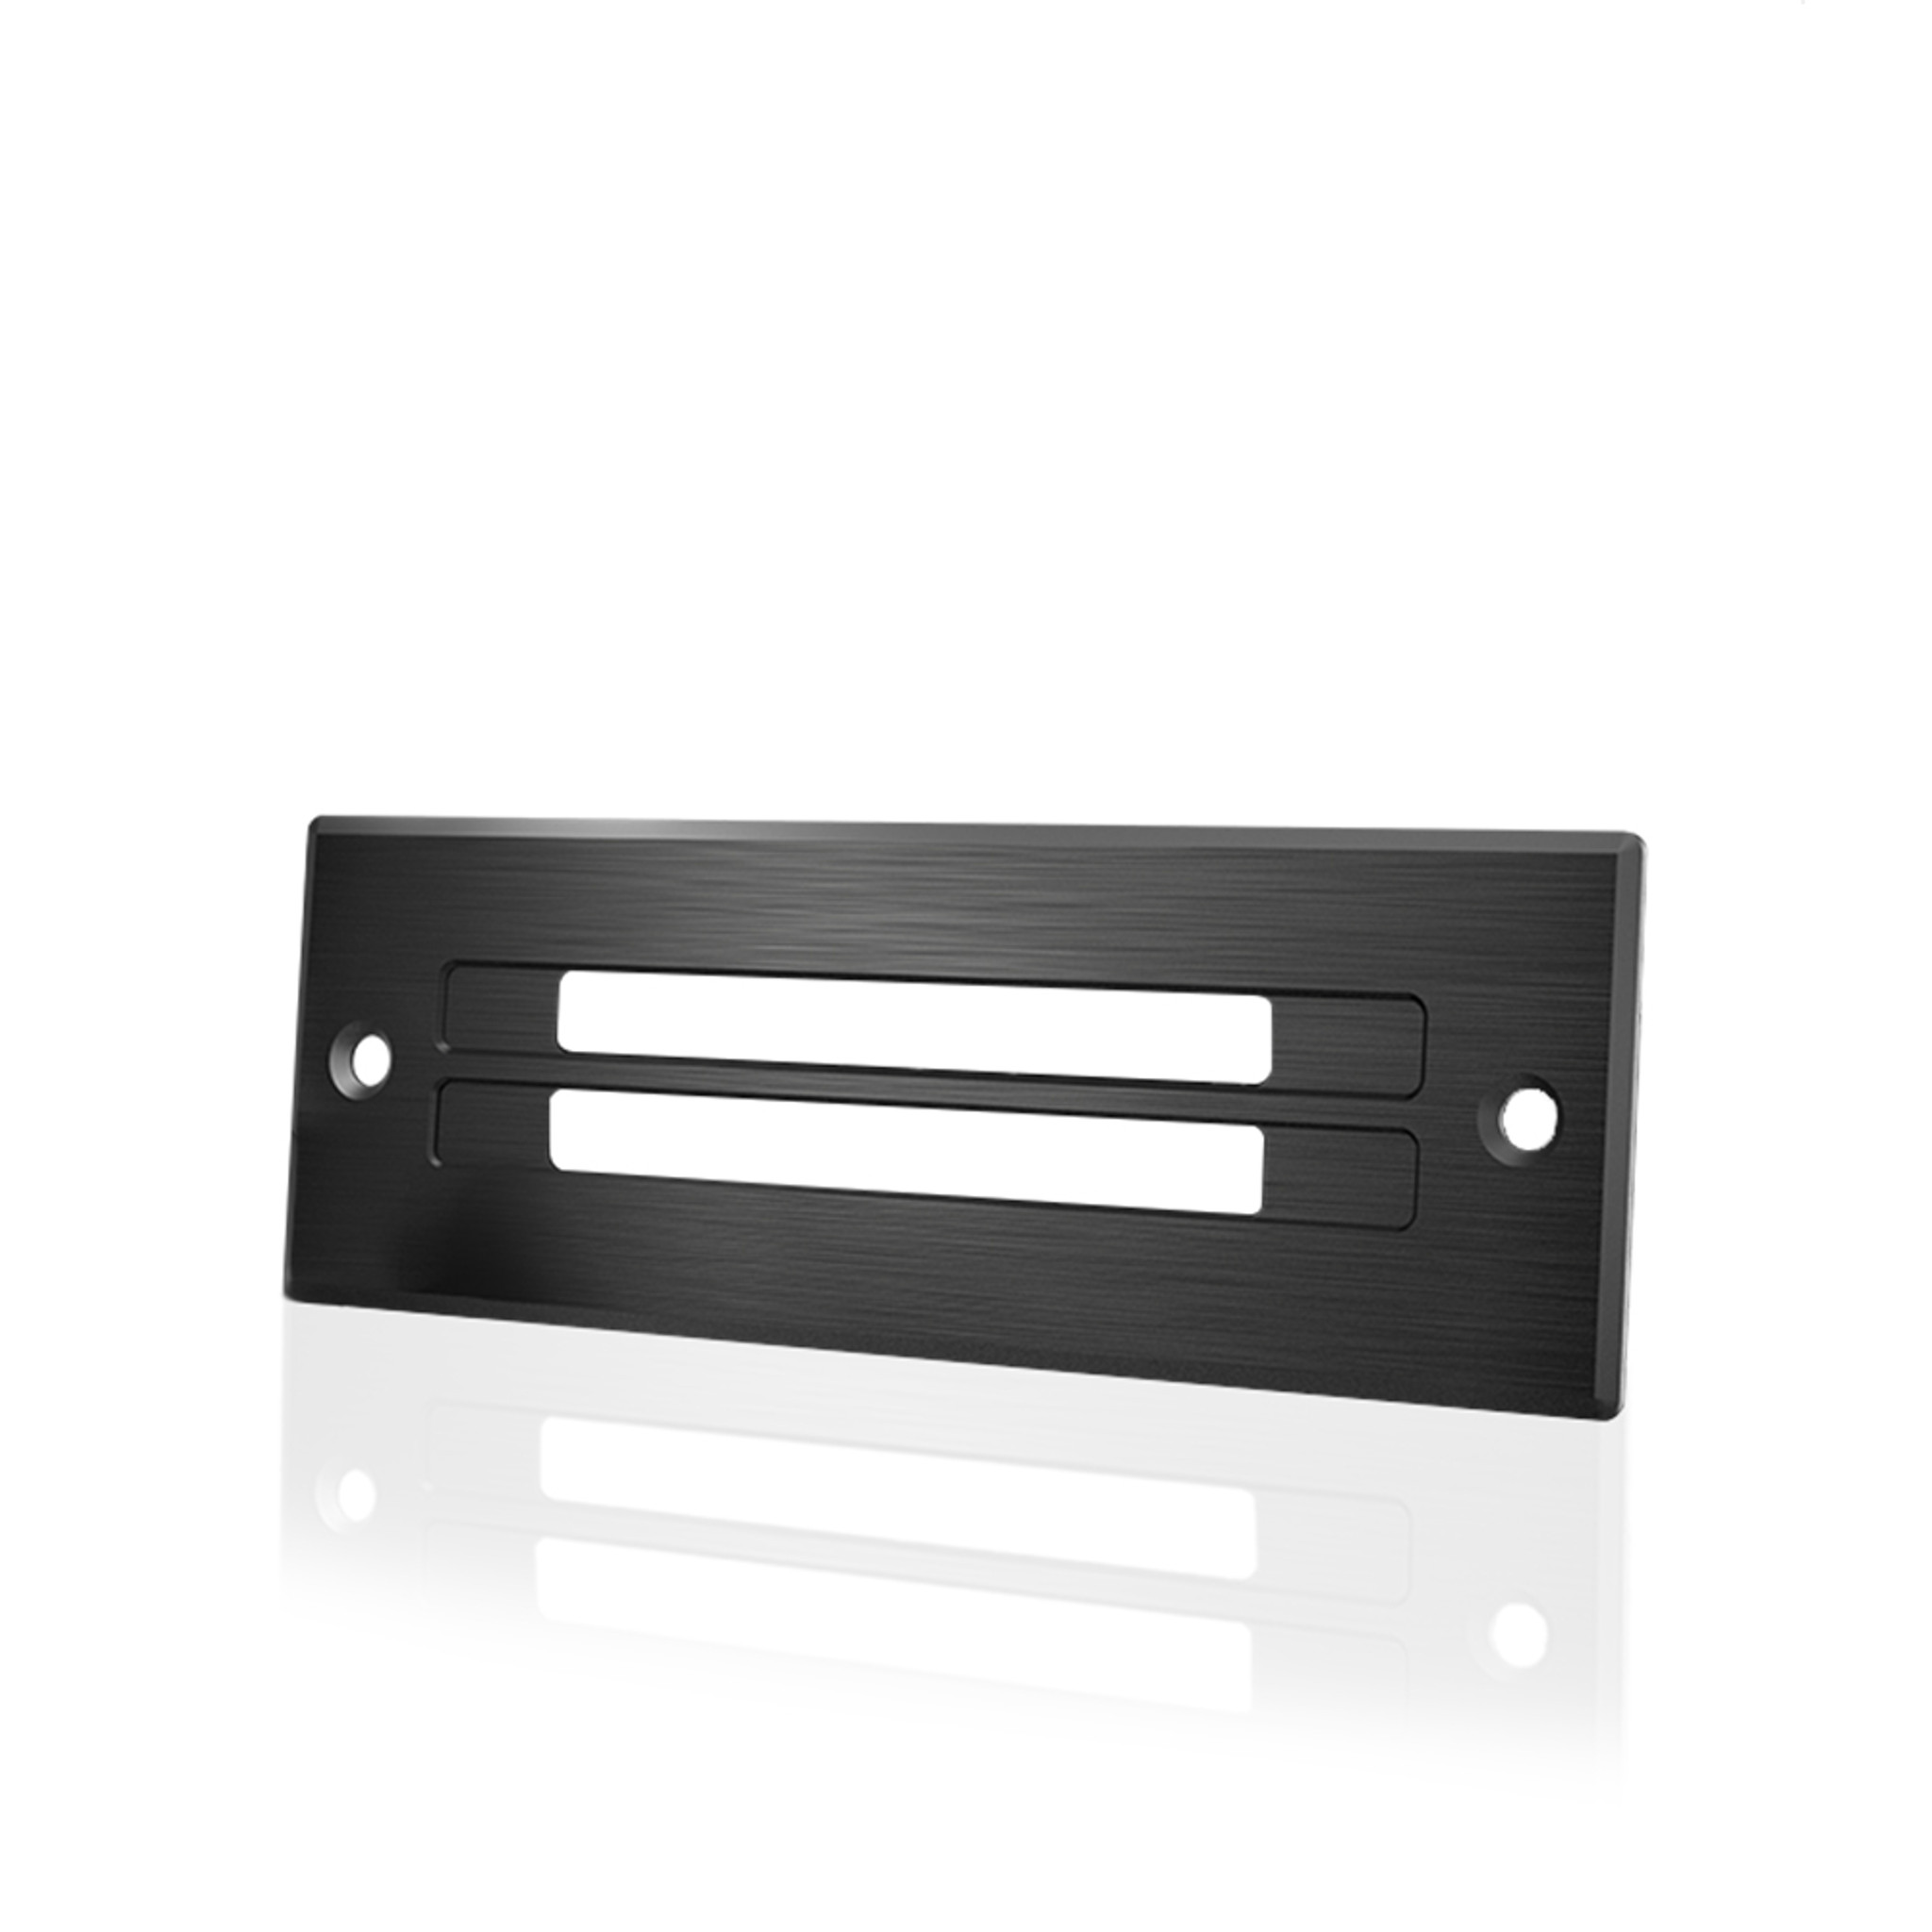 AC INFINITY, Cabinet Ventilation Grille Black, 6 Inch Low-Profile